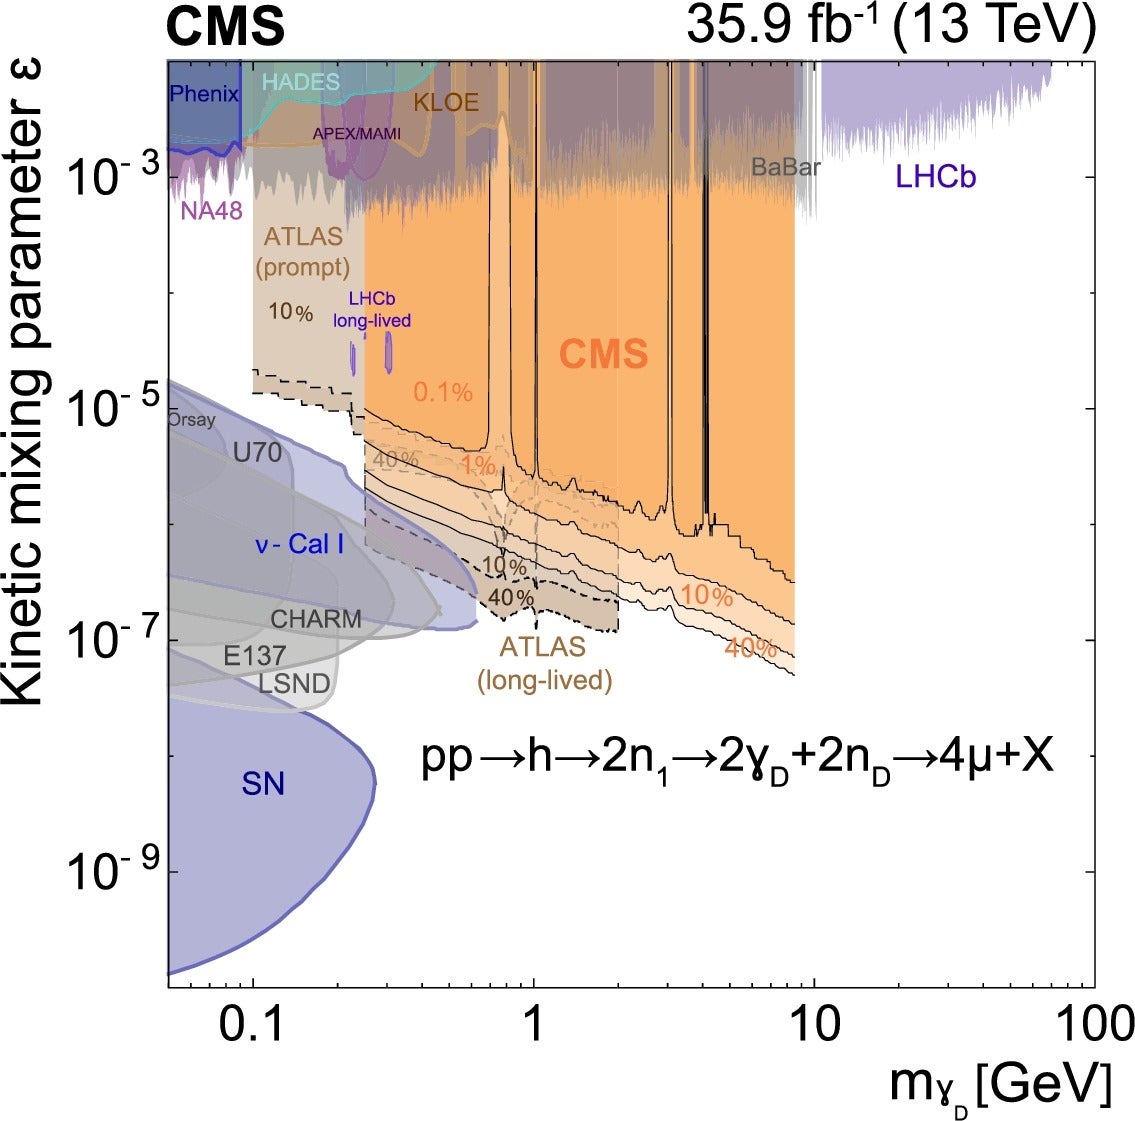 Limit set for the supersymmetry (SUSY) model with hidden sectors in search for pair production of new light bosons decaying into muons in proton-proton collisions, CMS Collaboration 2019